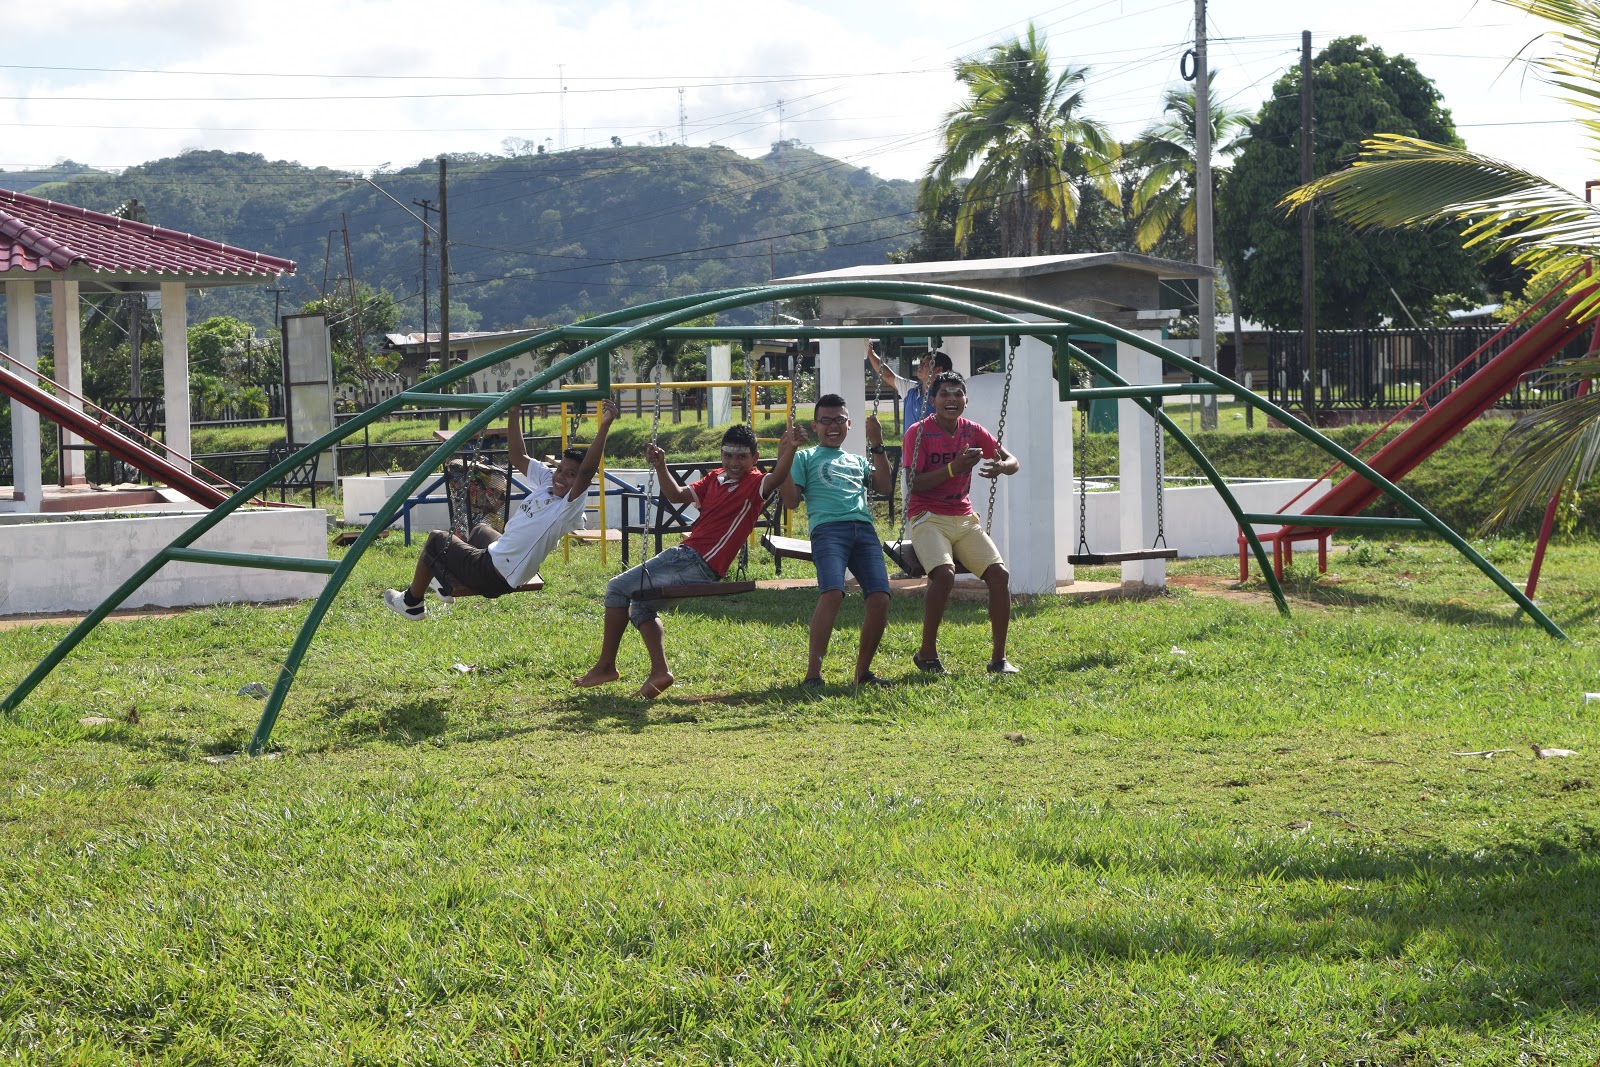 Youth from Quebrada Honda relaxing in the park across the street between sessions during Panama Camp 2018.